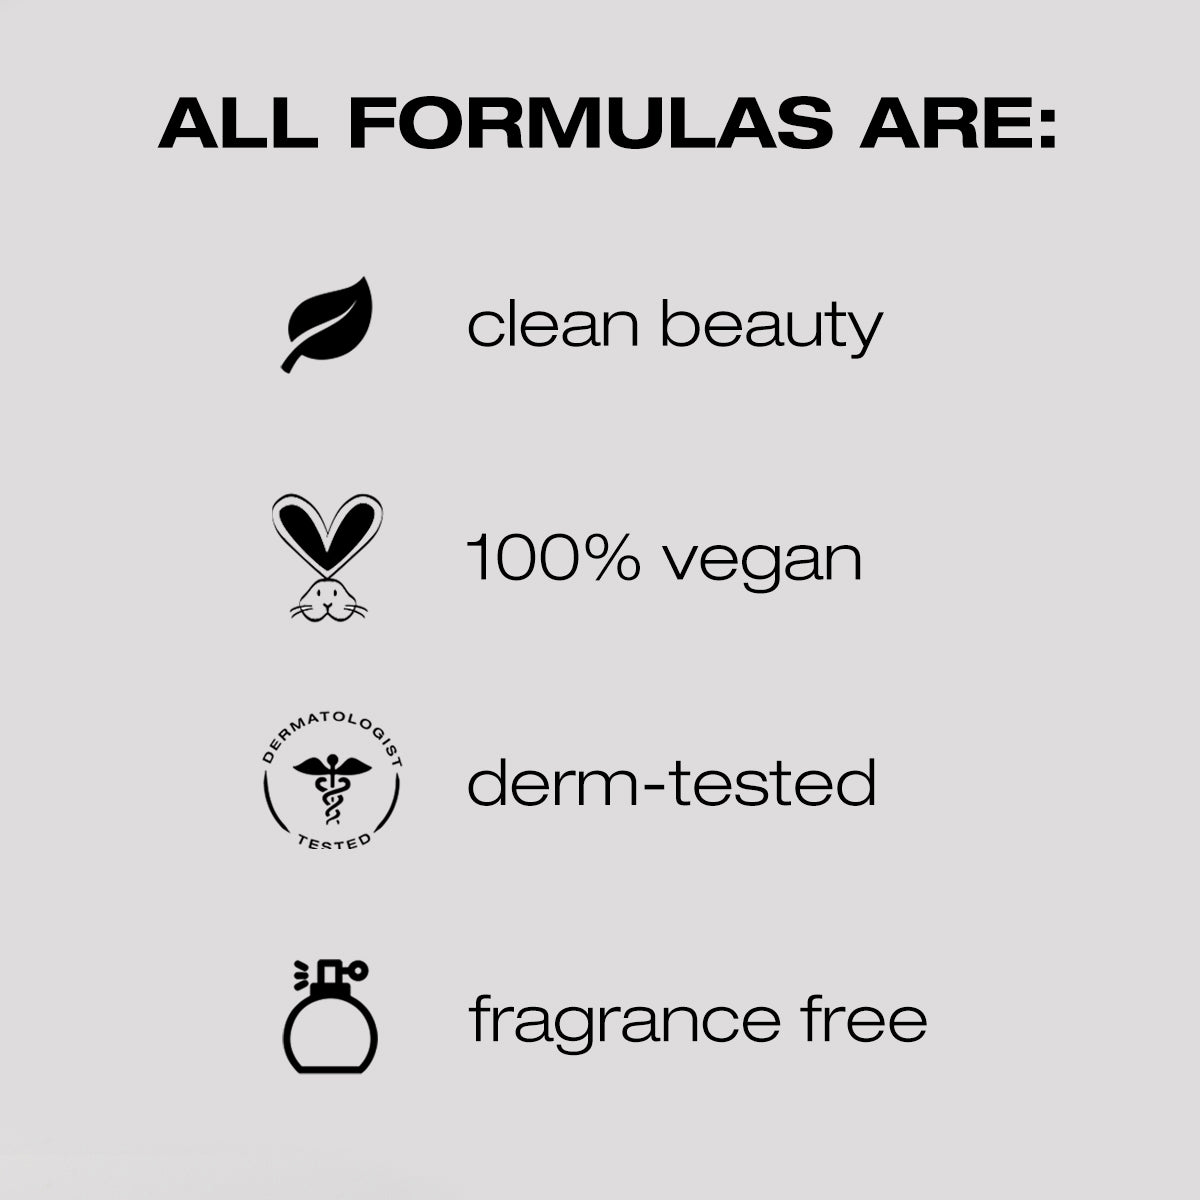 All formulas are clean beauty, 100% vegan, derm-tested, fragrance free